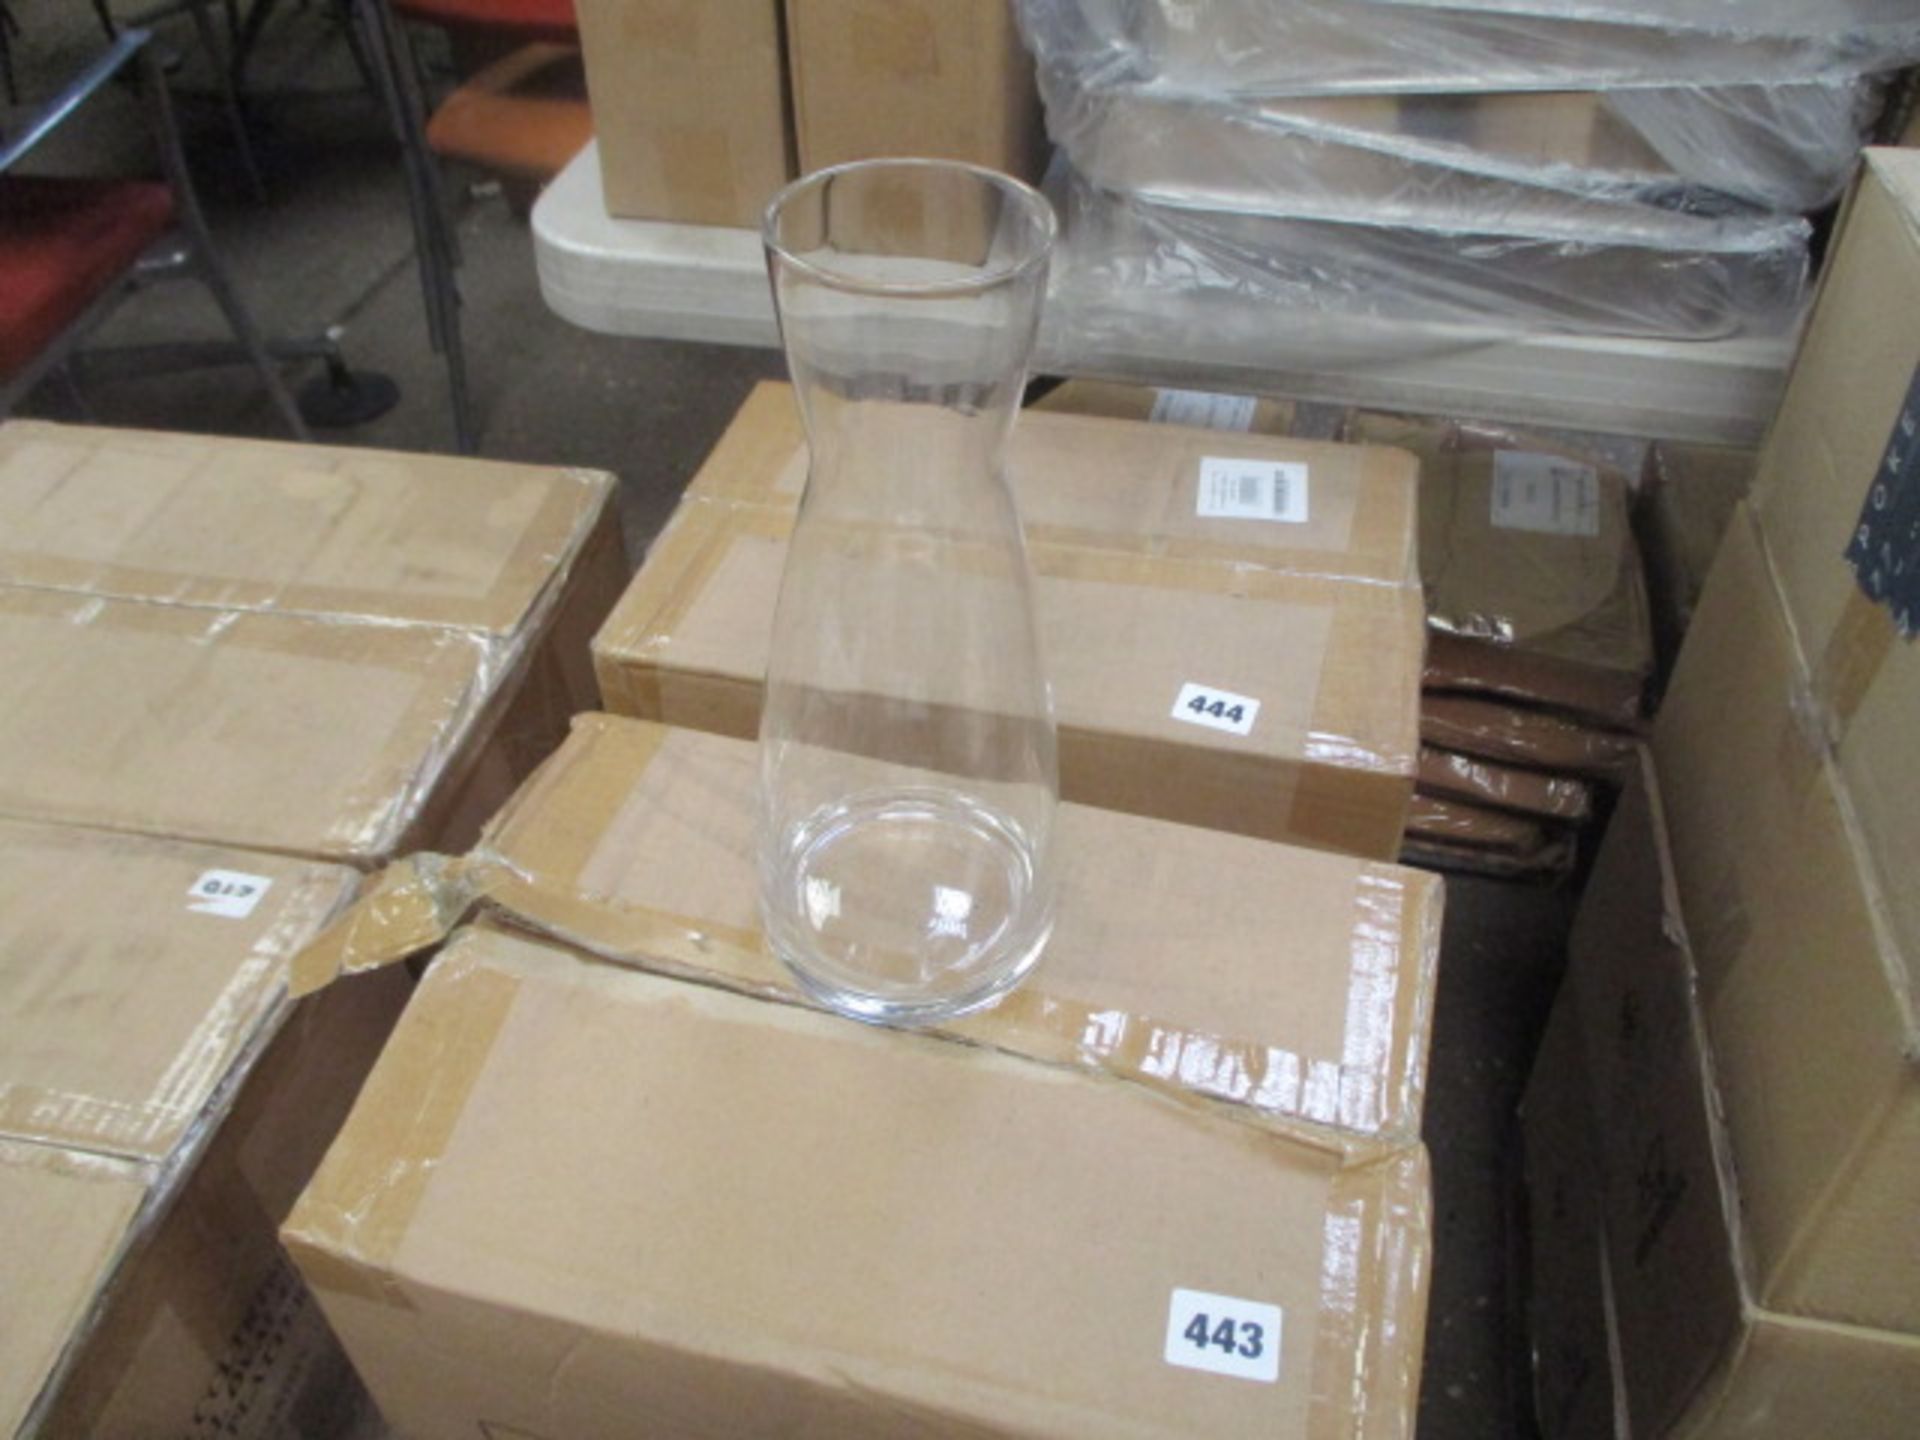 2 boxes of 6 (12 in total) 1L glass carafes